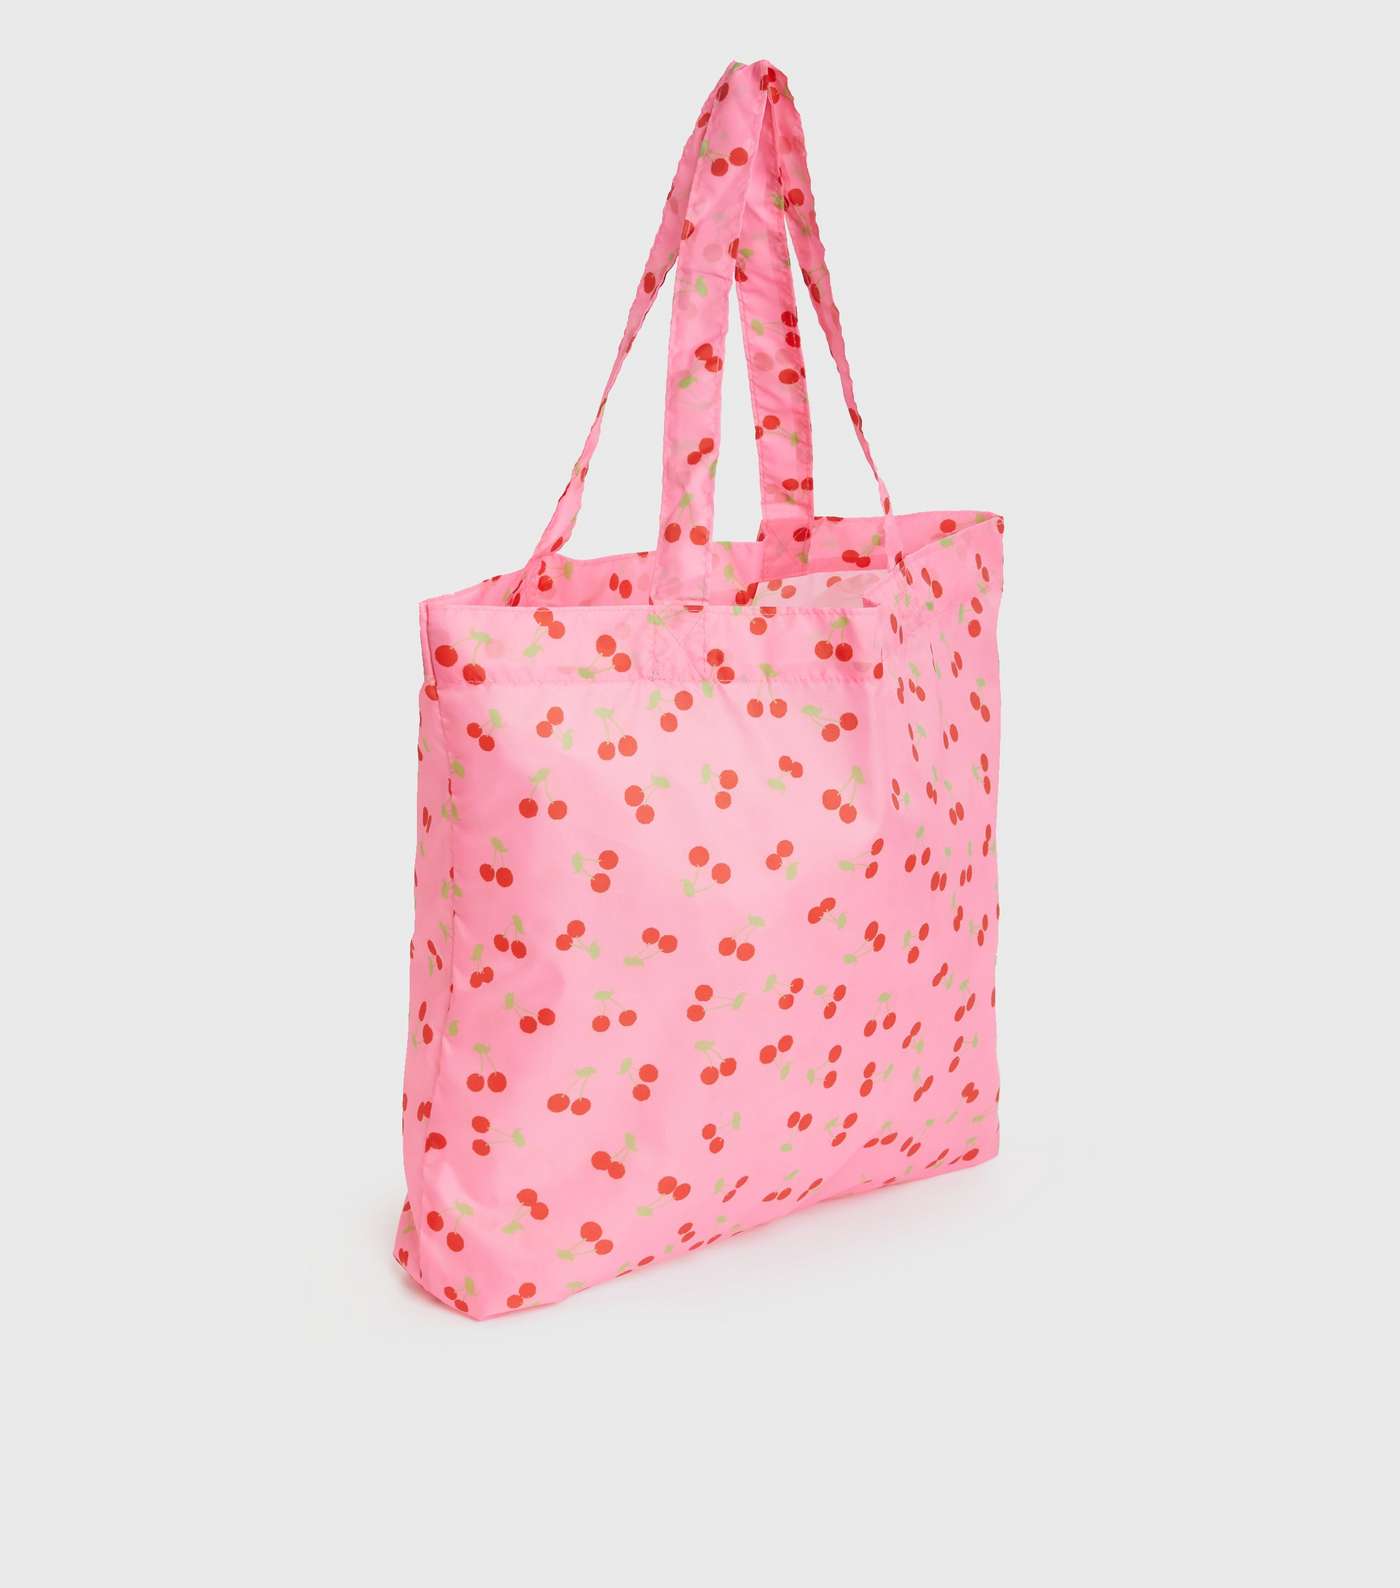 PIECES Pink Cherry Tote Bag Image 3